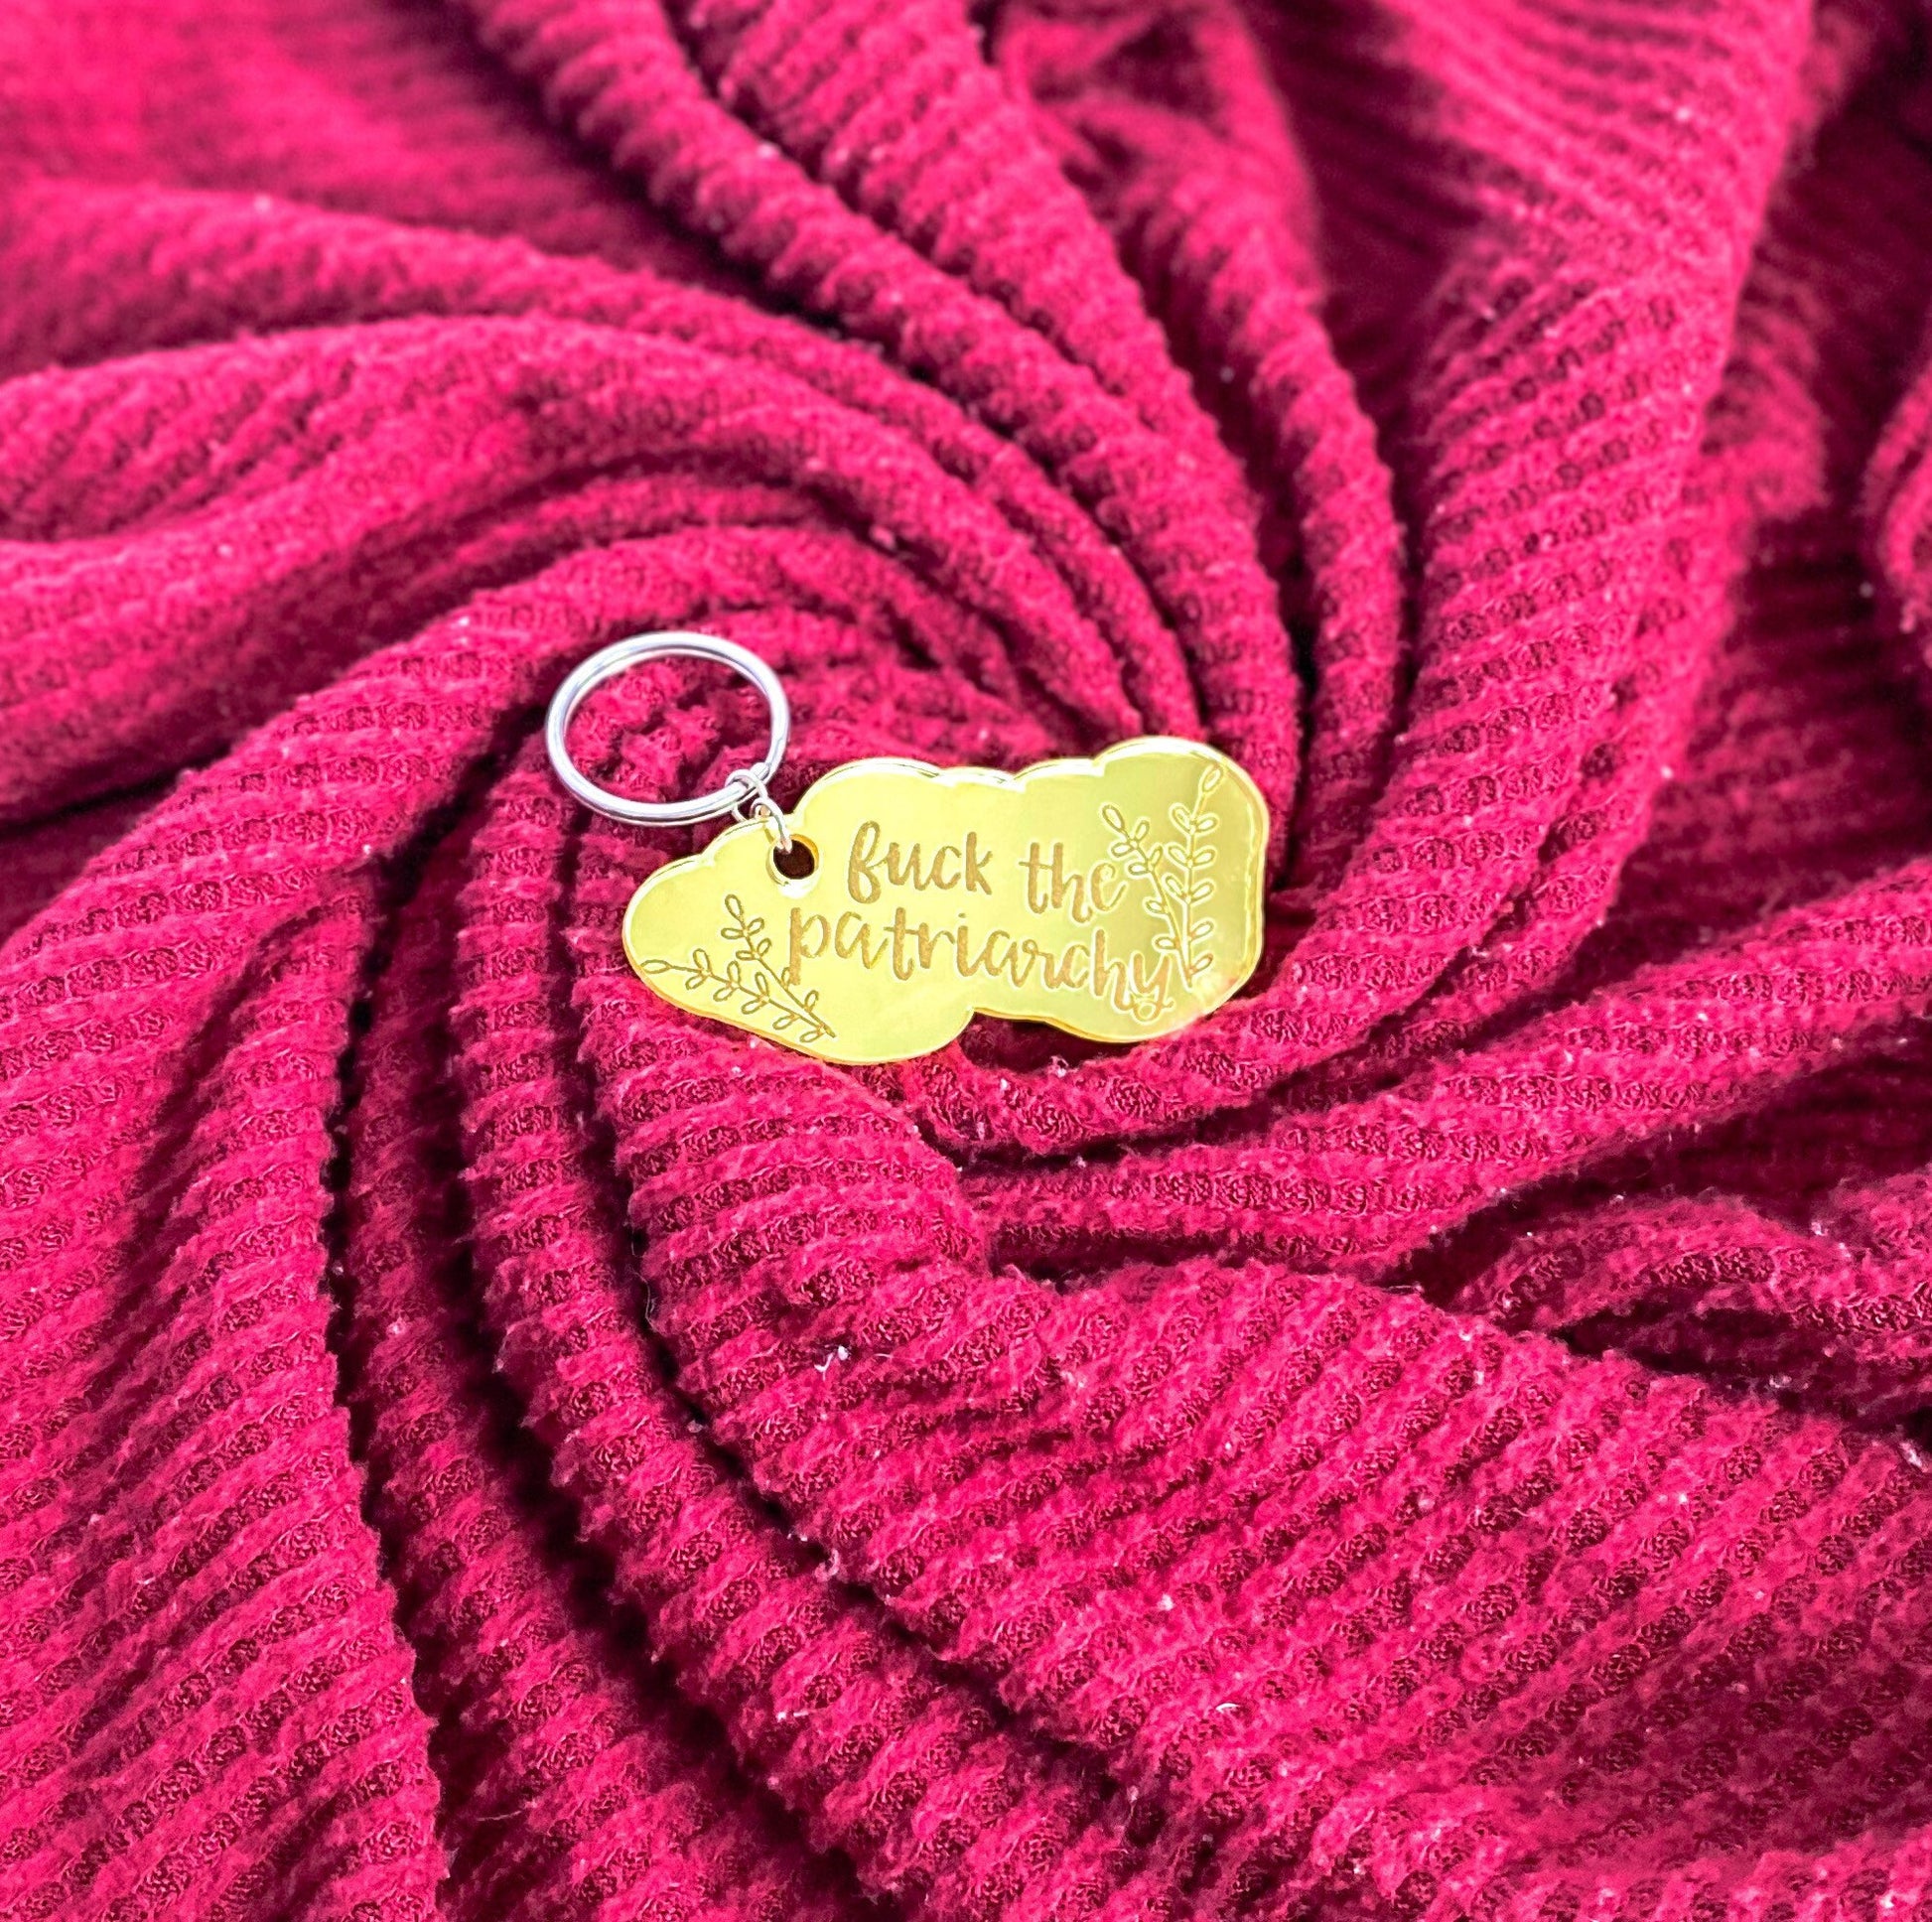 Fuck the Patriarchy Keychain, Funny Taylor Swift Gift for Her, All Too Well Taylors Version, Gift for Swiftie, Swiftie Stocking Stuffer